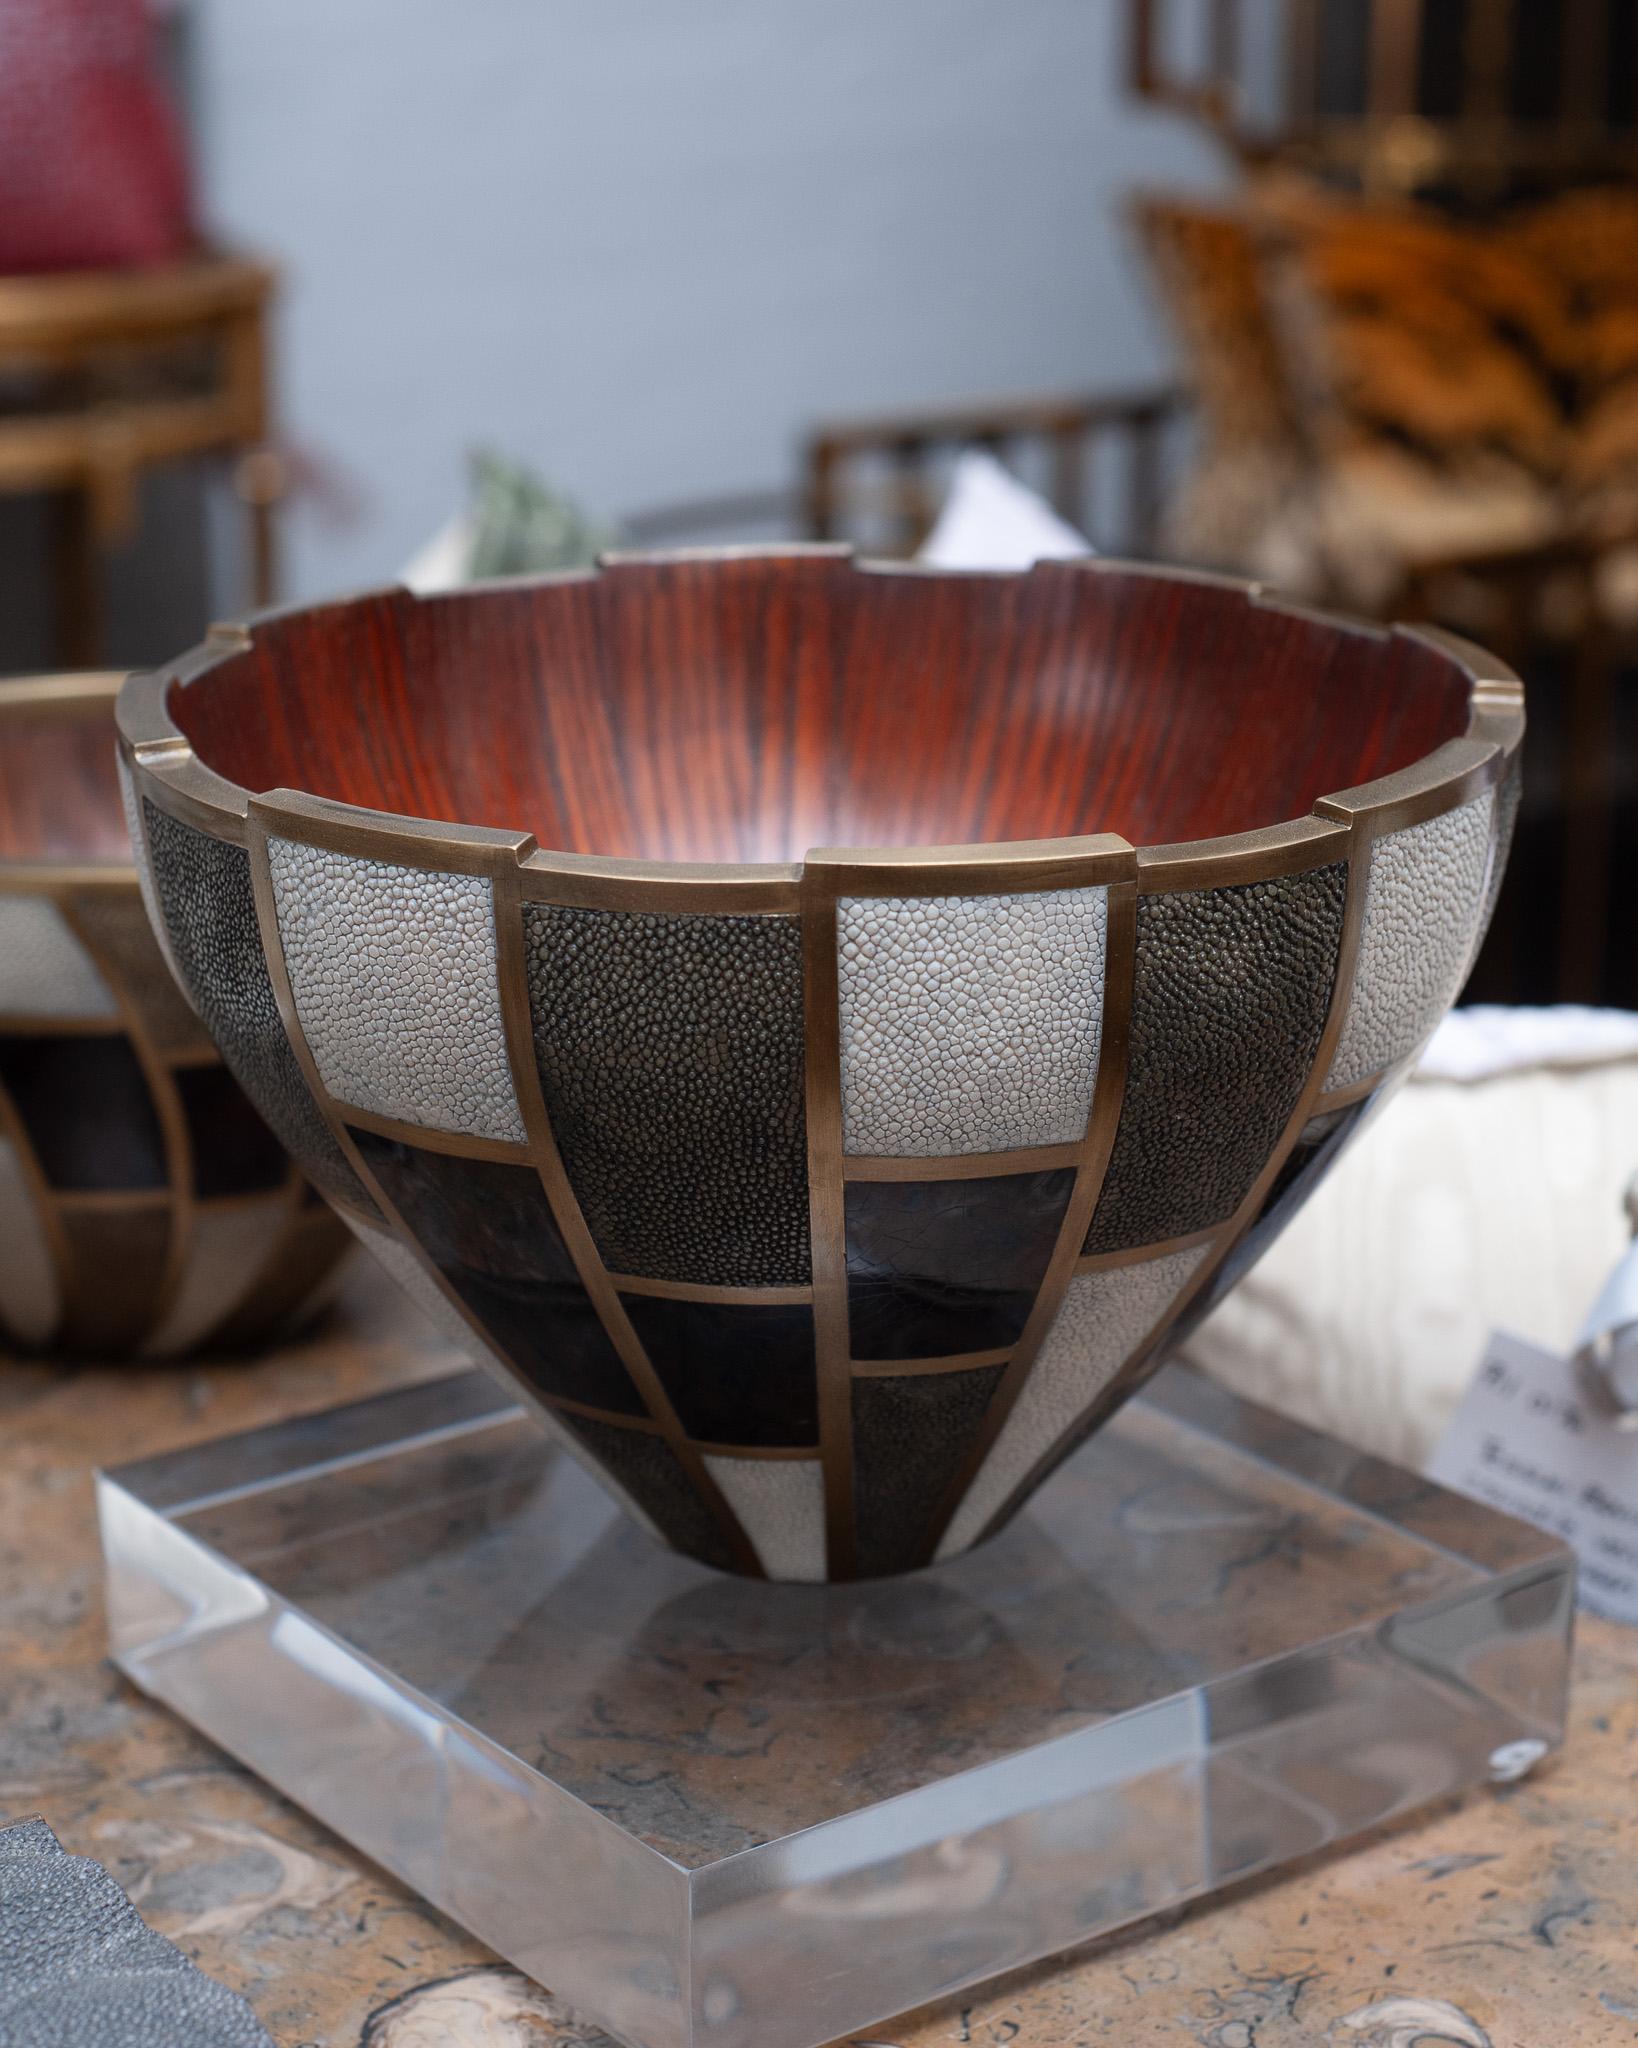 In stock now - A gorgeous walnut bowl made R & Y Augousti, with brass borders inlaid with creme & grey shagreen and black penshell. Expertly crafted, this decorative bowl is a perfect sculptural accessory for any table and is as beautiful as it is